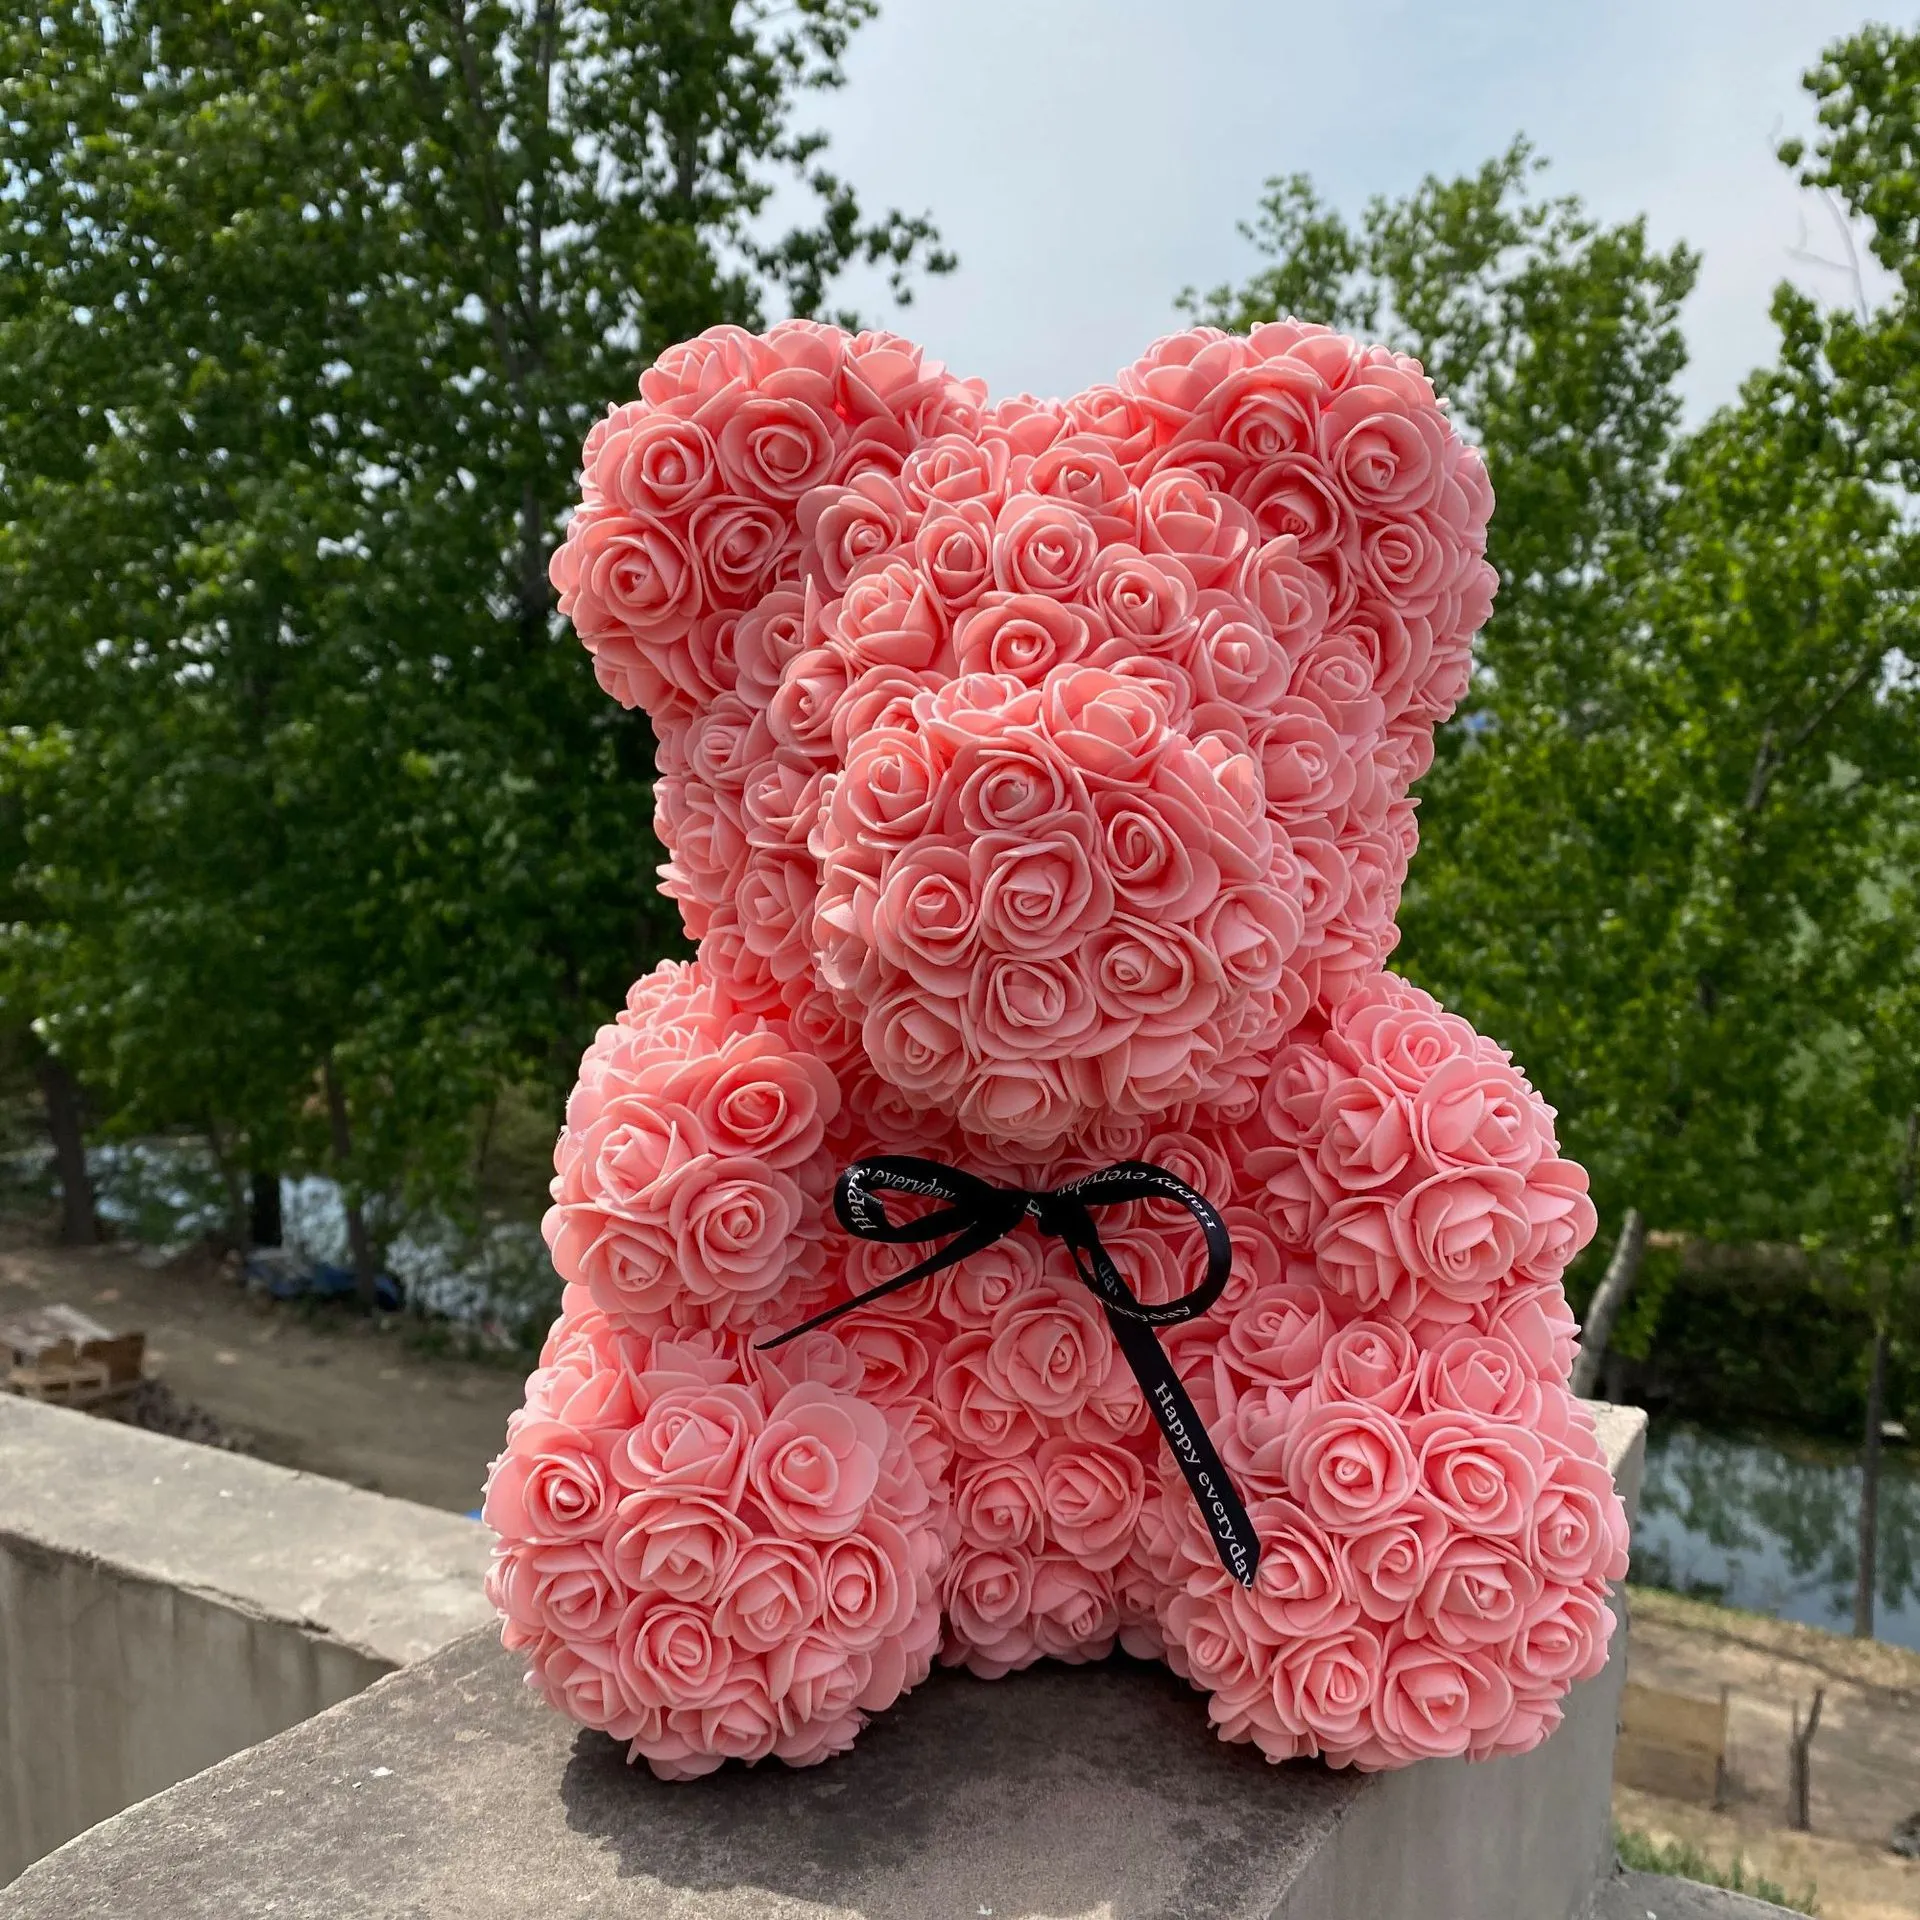 Valentines Day Gifts For Her Valentines Day Gifts Mothers Day Rose Bear  (Red)